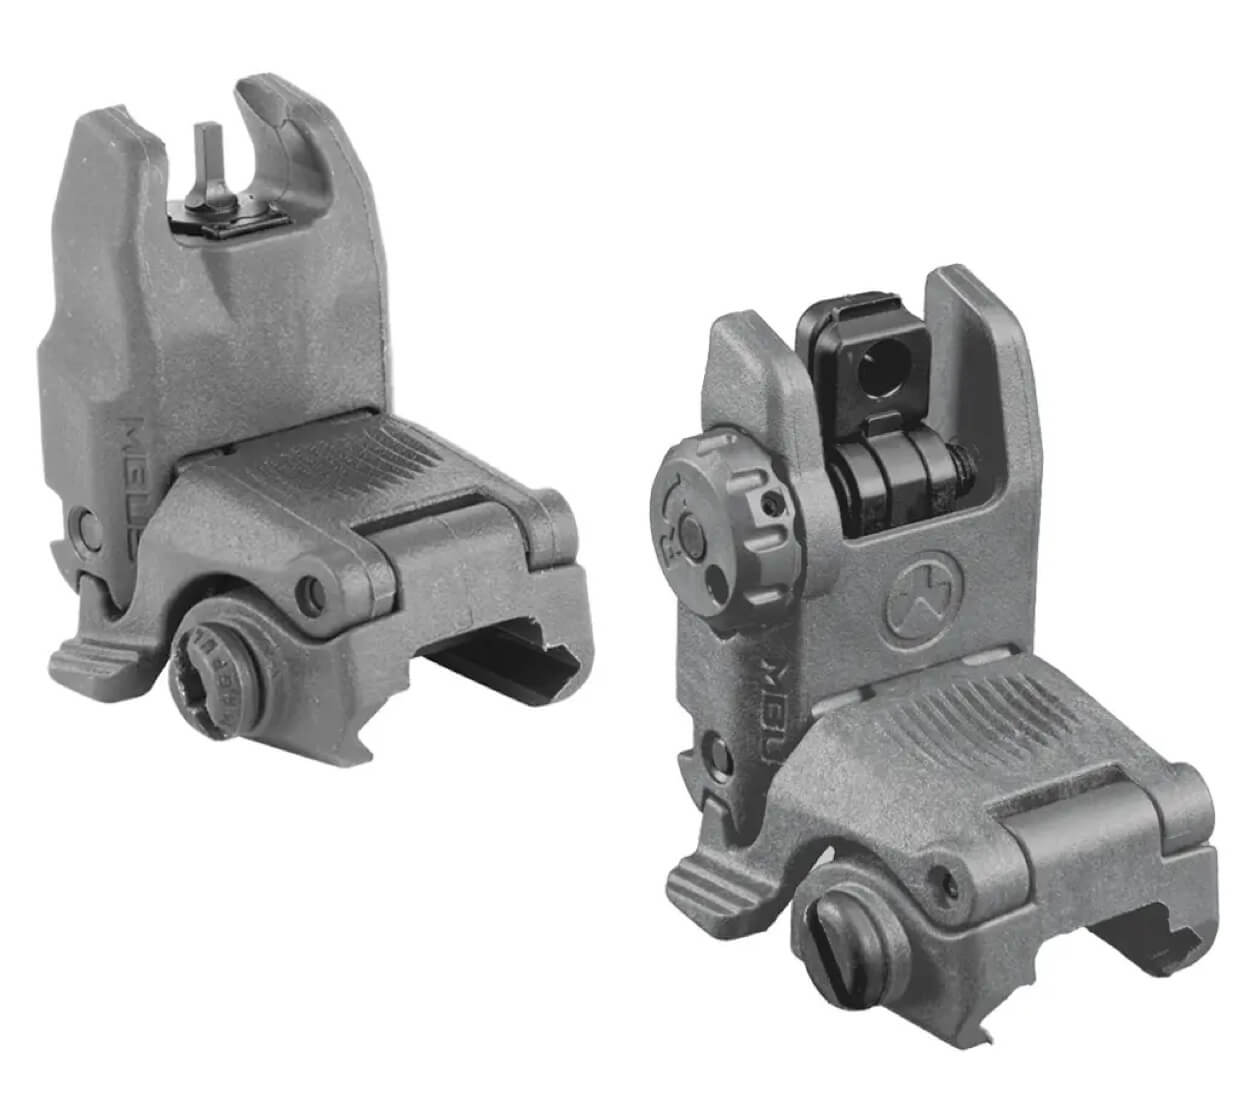 Flip-up iron sights for Picatinny rail